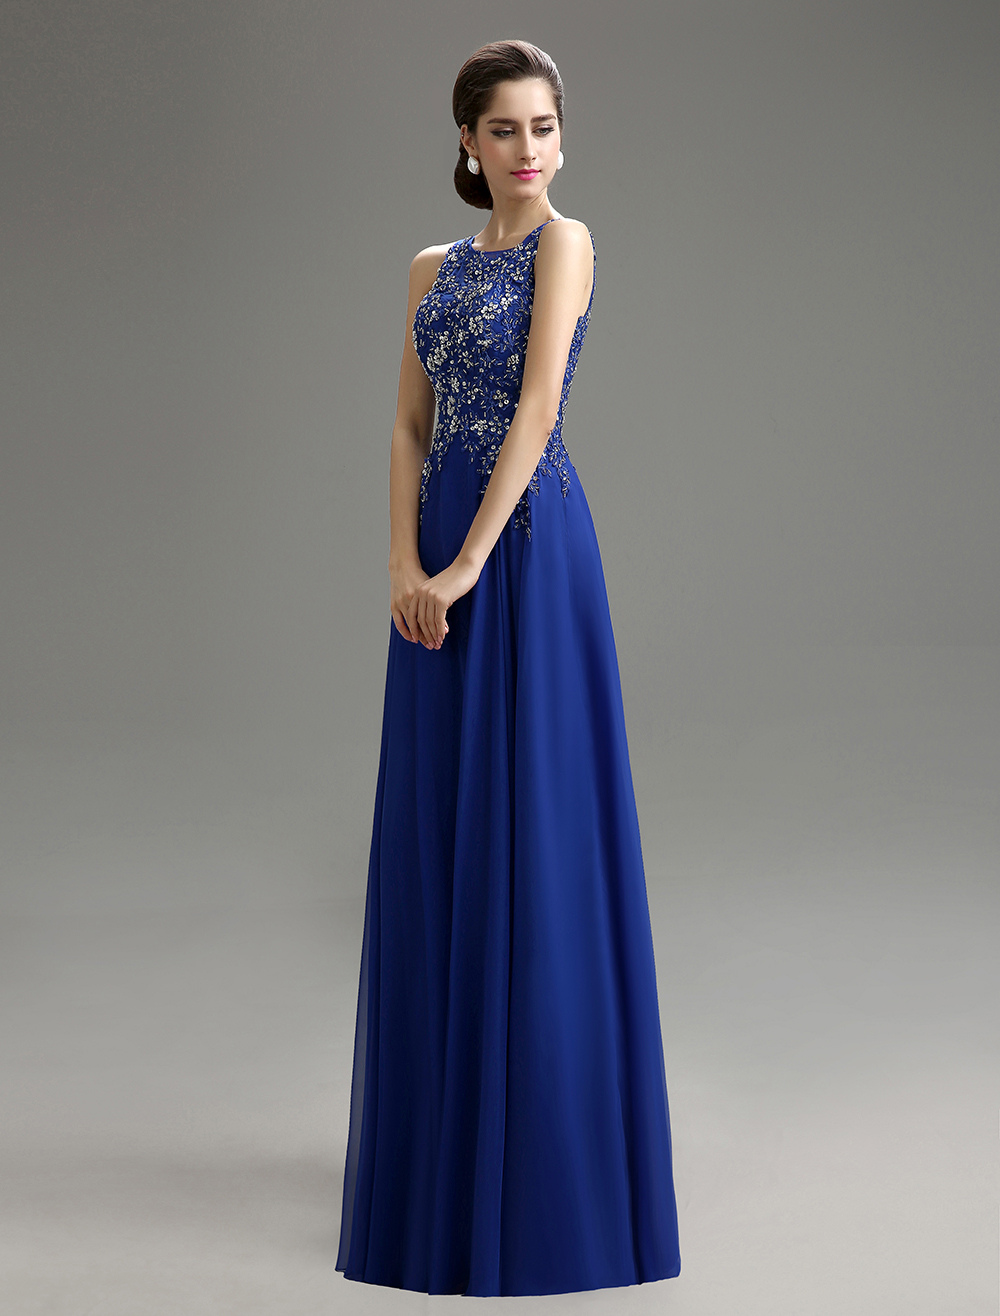 Royal Blue Applique Beaded Chiffon Dress For Mother of the Bride ...